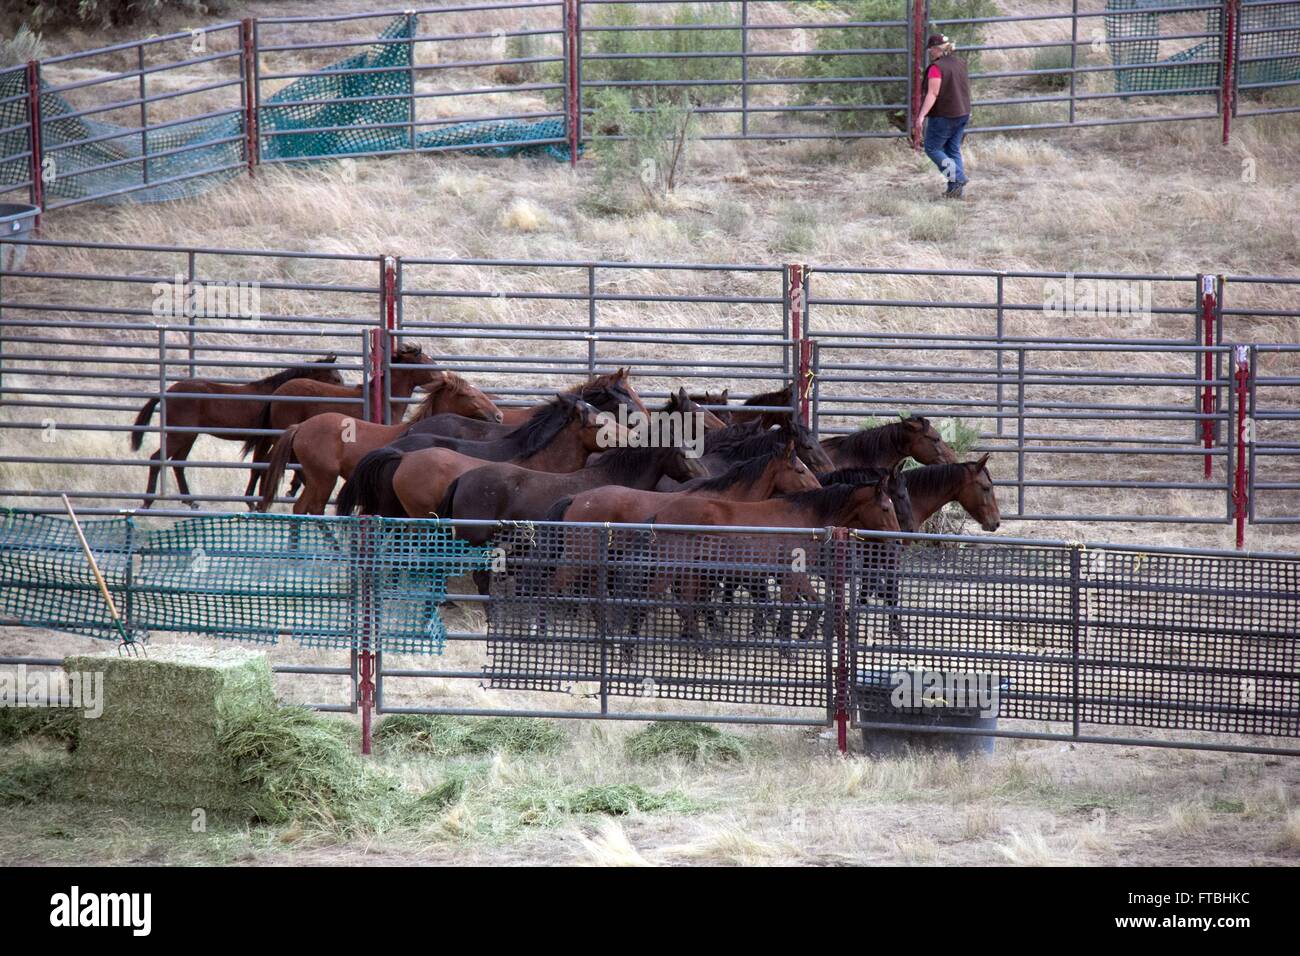 Wild horses from the West Douglas herd in the White River Land Management area are gathered as part of the Bureau of Land Management program to reduce the size of the population September 16, 2015 near Meeker, Colorado. Stock Photo